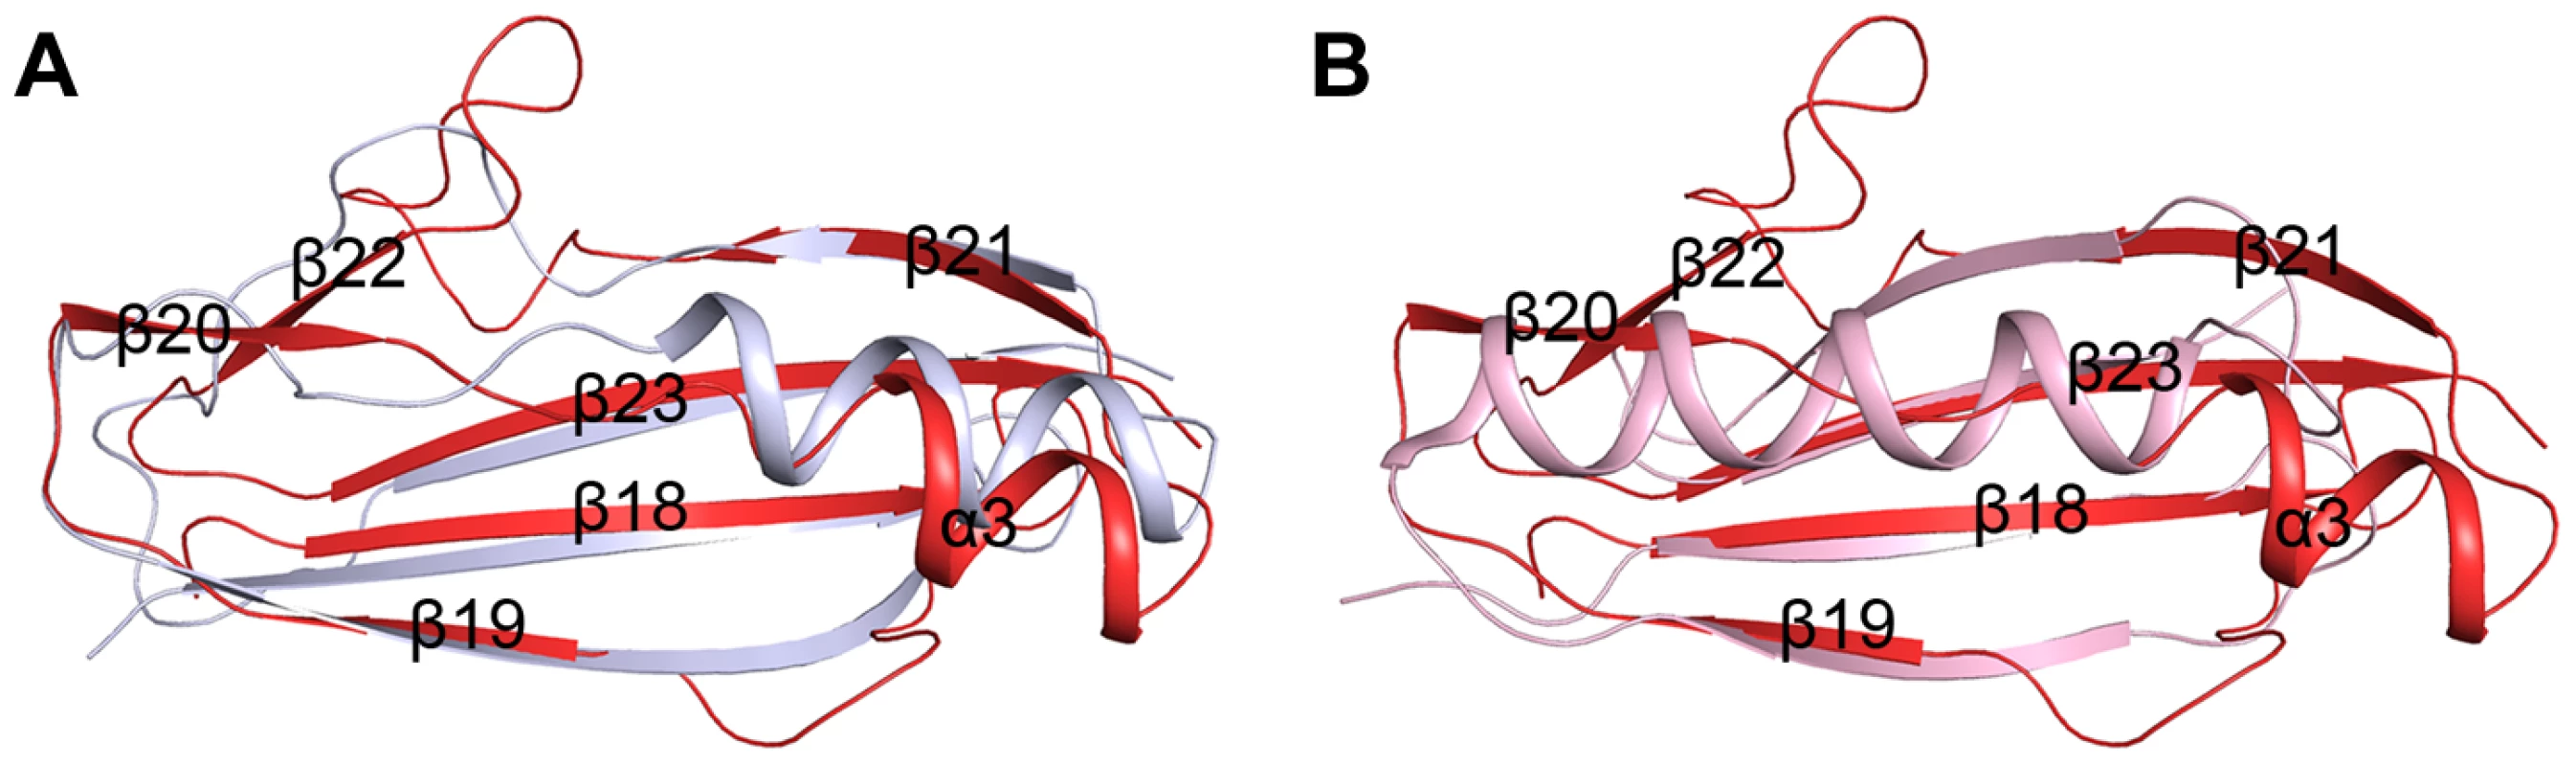 Superpositions of the β-GF module against A) the Ig-binding proteins of B1 domain of mucus-binding protein type 2 repeat Mub-R5 from <i>L. reuteri</i> (PDB 3I57), and B) that of Protein L (PpL) from <i>P. magnus</i> (PDB 1HEZ).